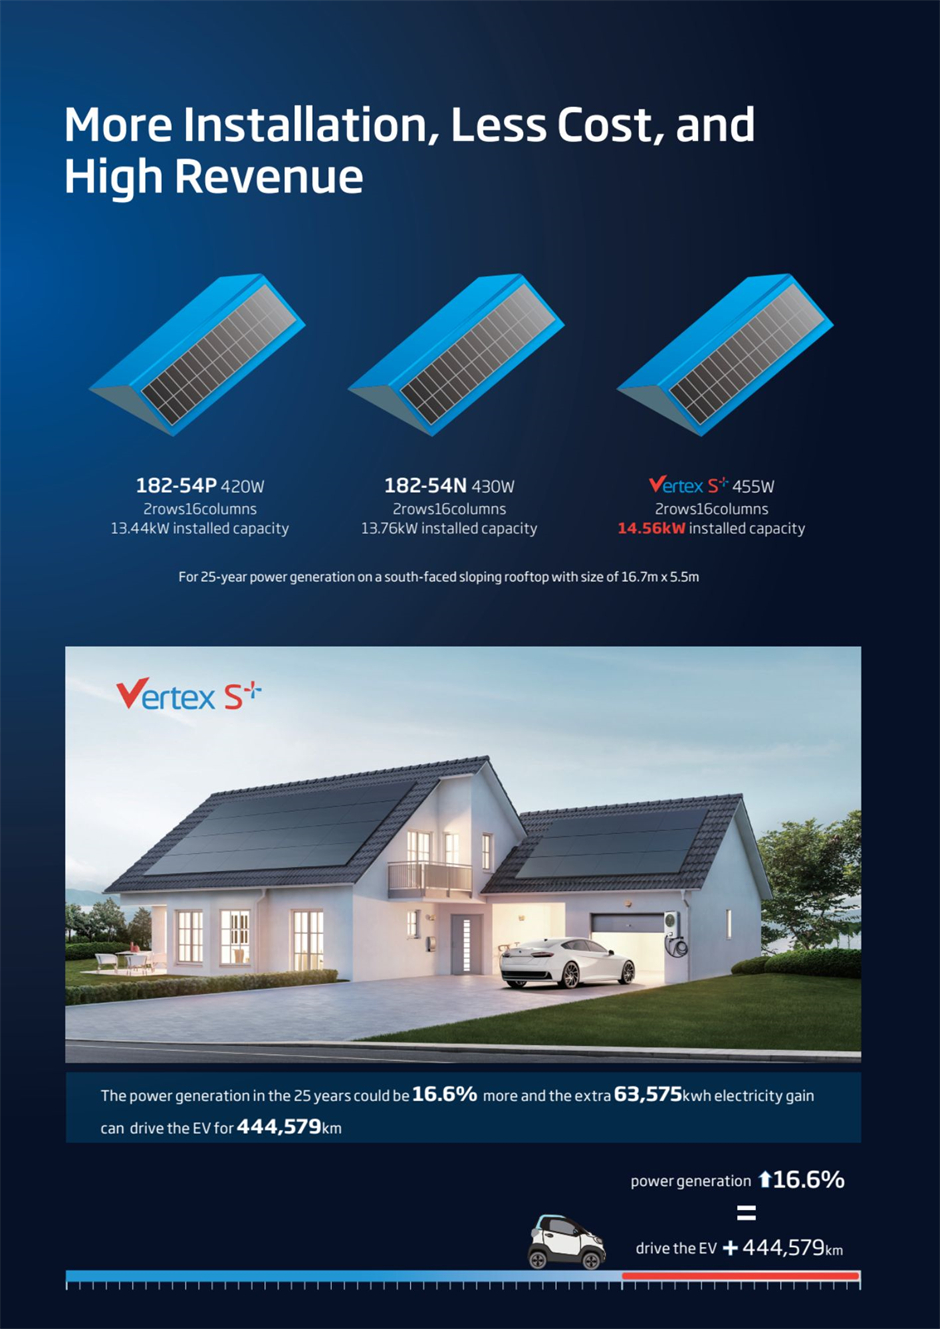 On the same roof, the Vertex S+ 455W solar module delivers higher installation capacity and generates 16.6% more power.